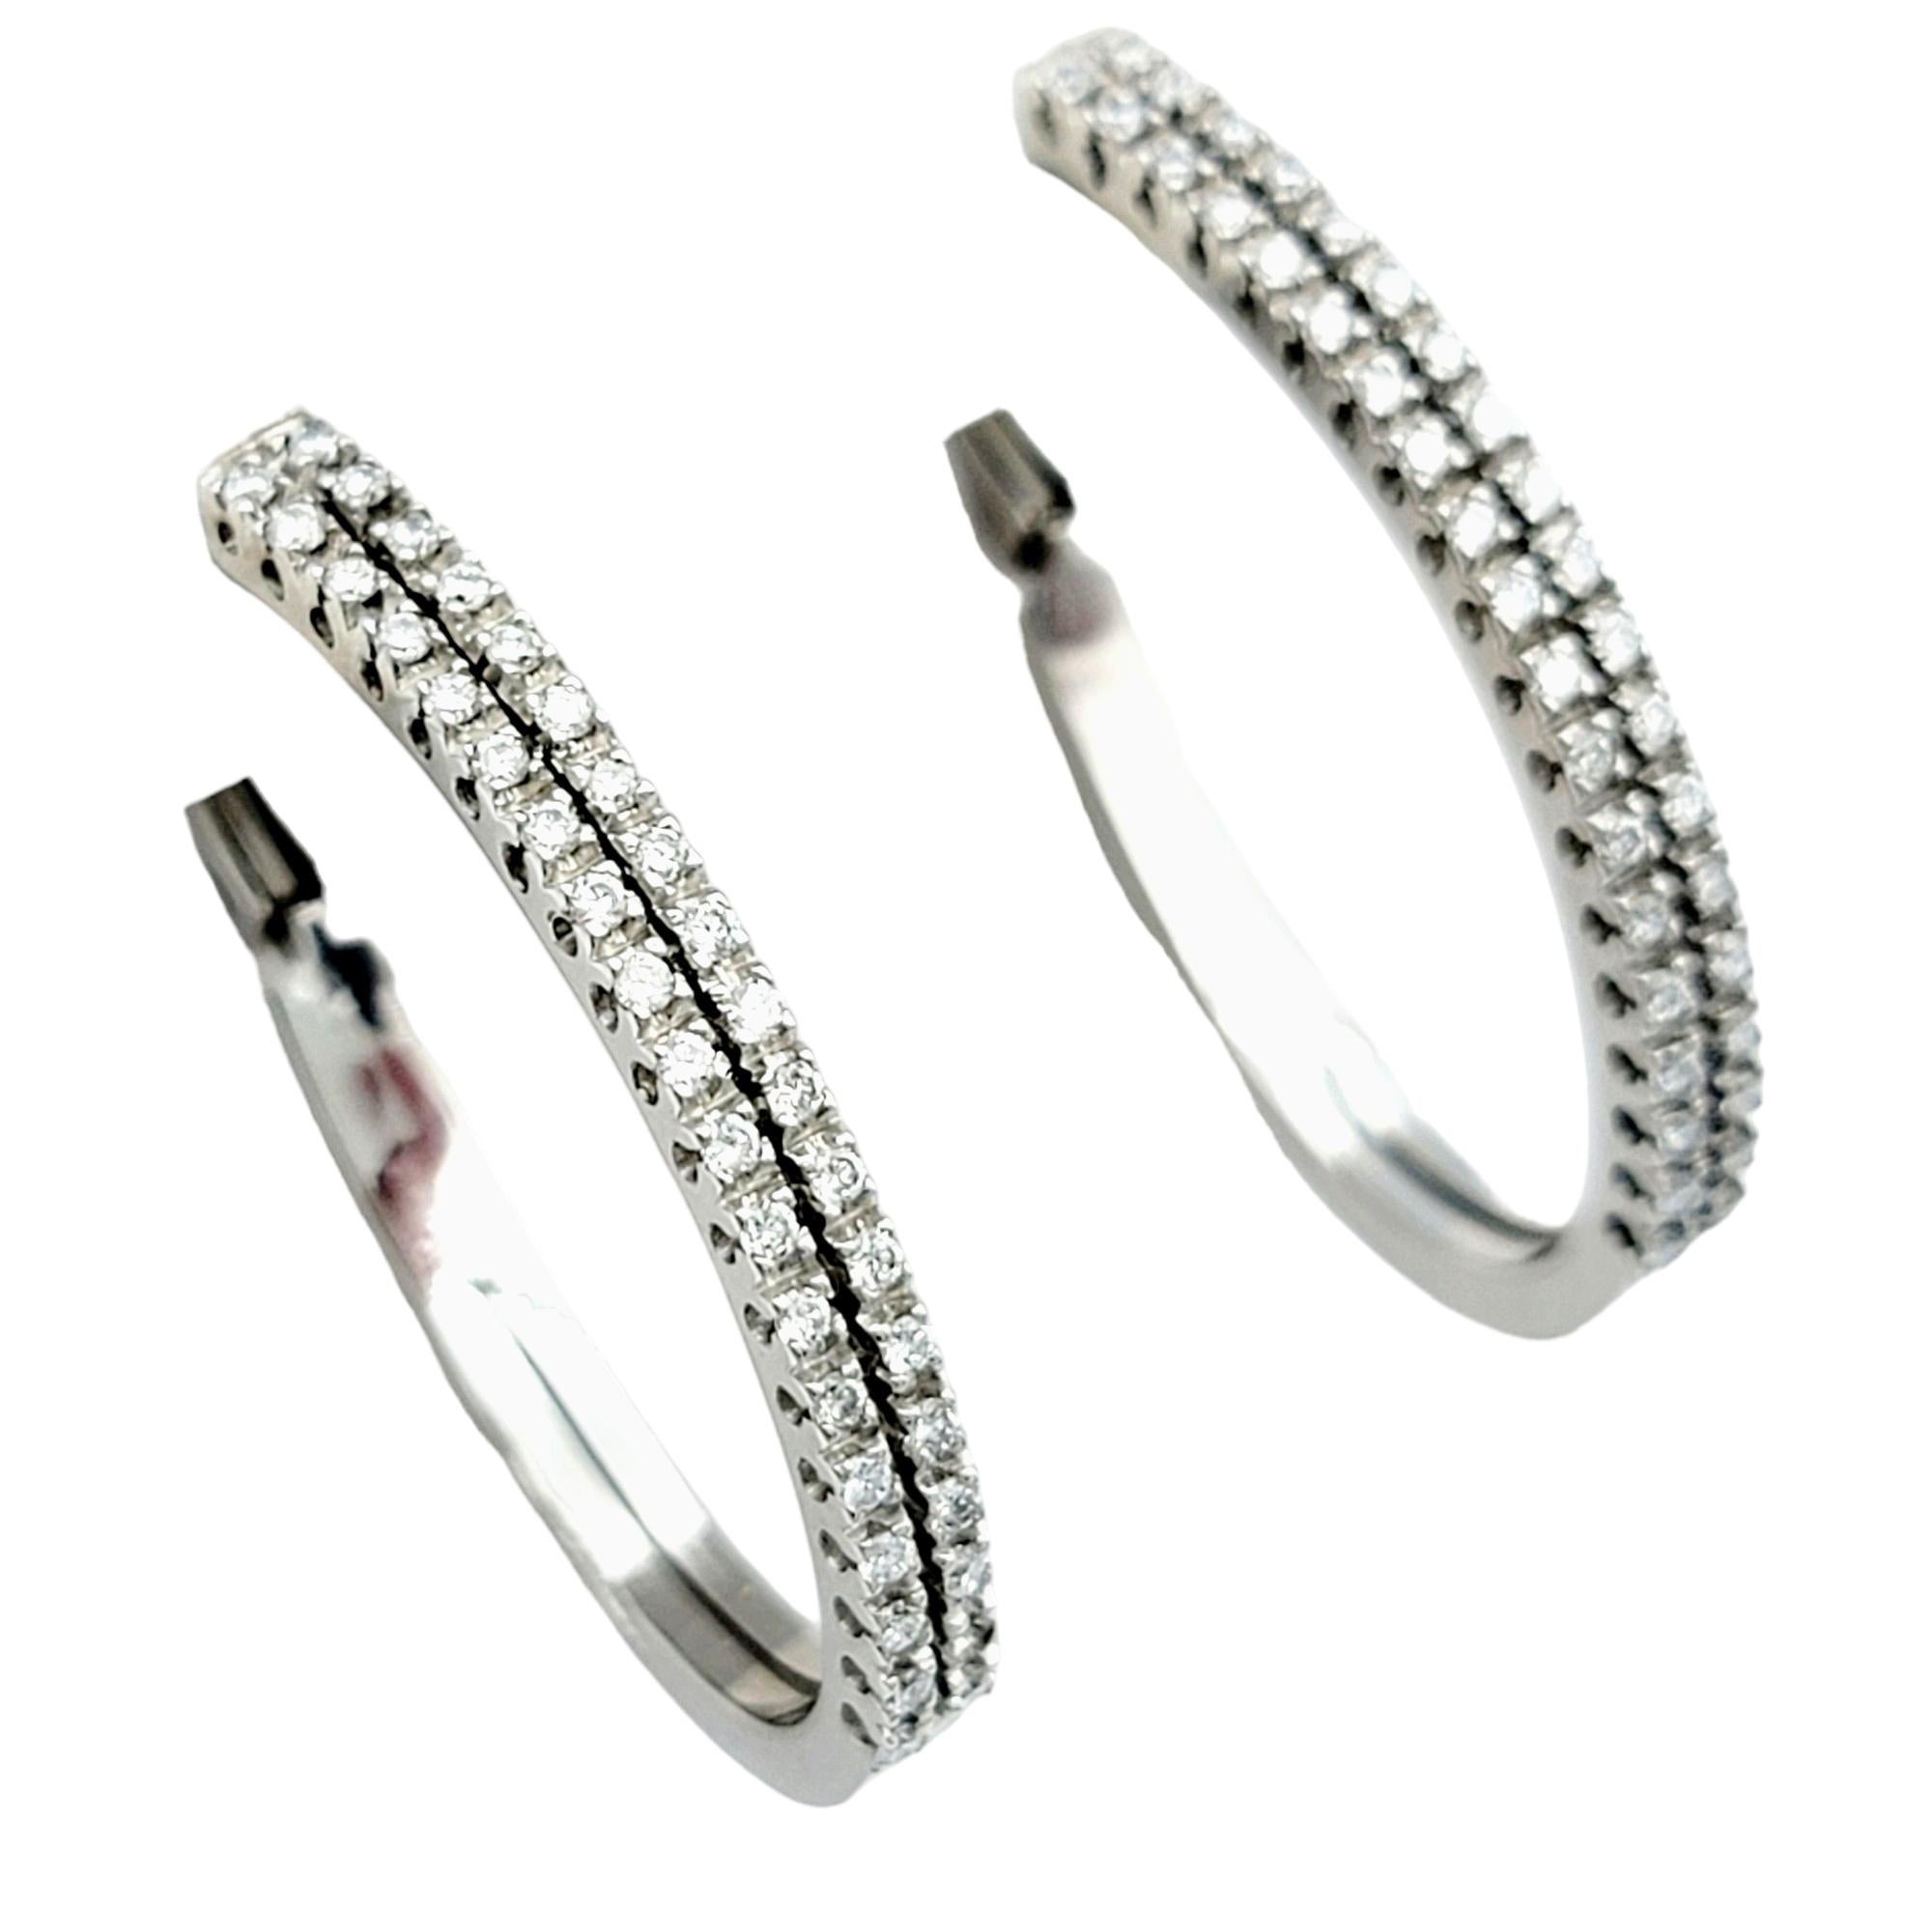 These stunning Raima diamond hoop earrings exude timeless elegance and sophistication. Crafted with meticulous attention to detail, each earring features two columns of round diamonds adorning the front side of the hoops, creating a captivating